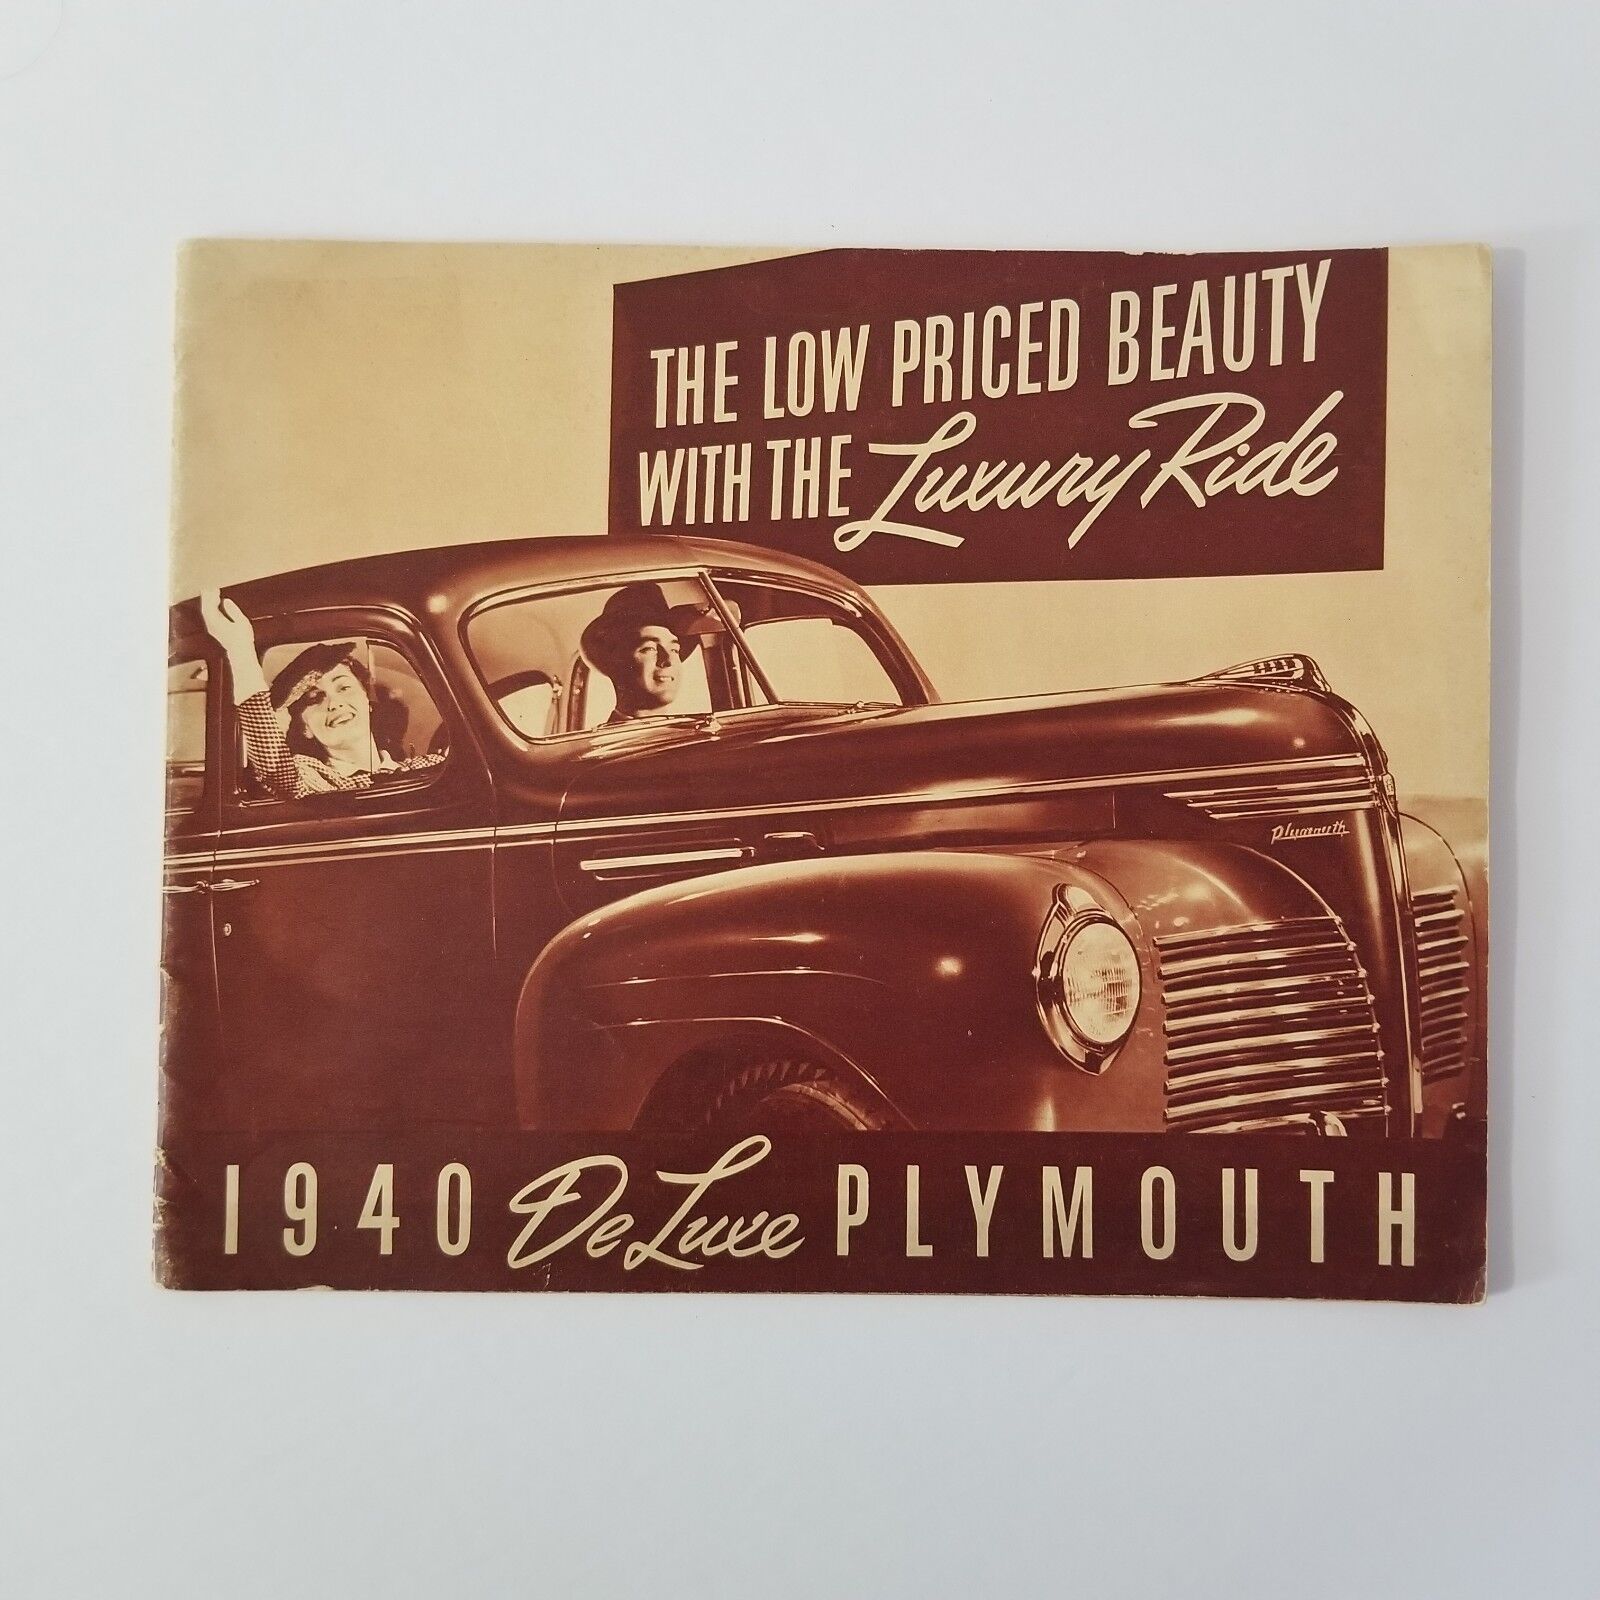 ORIGINAL 1940 PLYMOUTH DELUXE LUXURY RIDE BROCHURE ~ 24 PAGES ~ 7.25 X 10 ~ 40PL